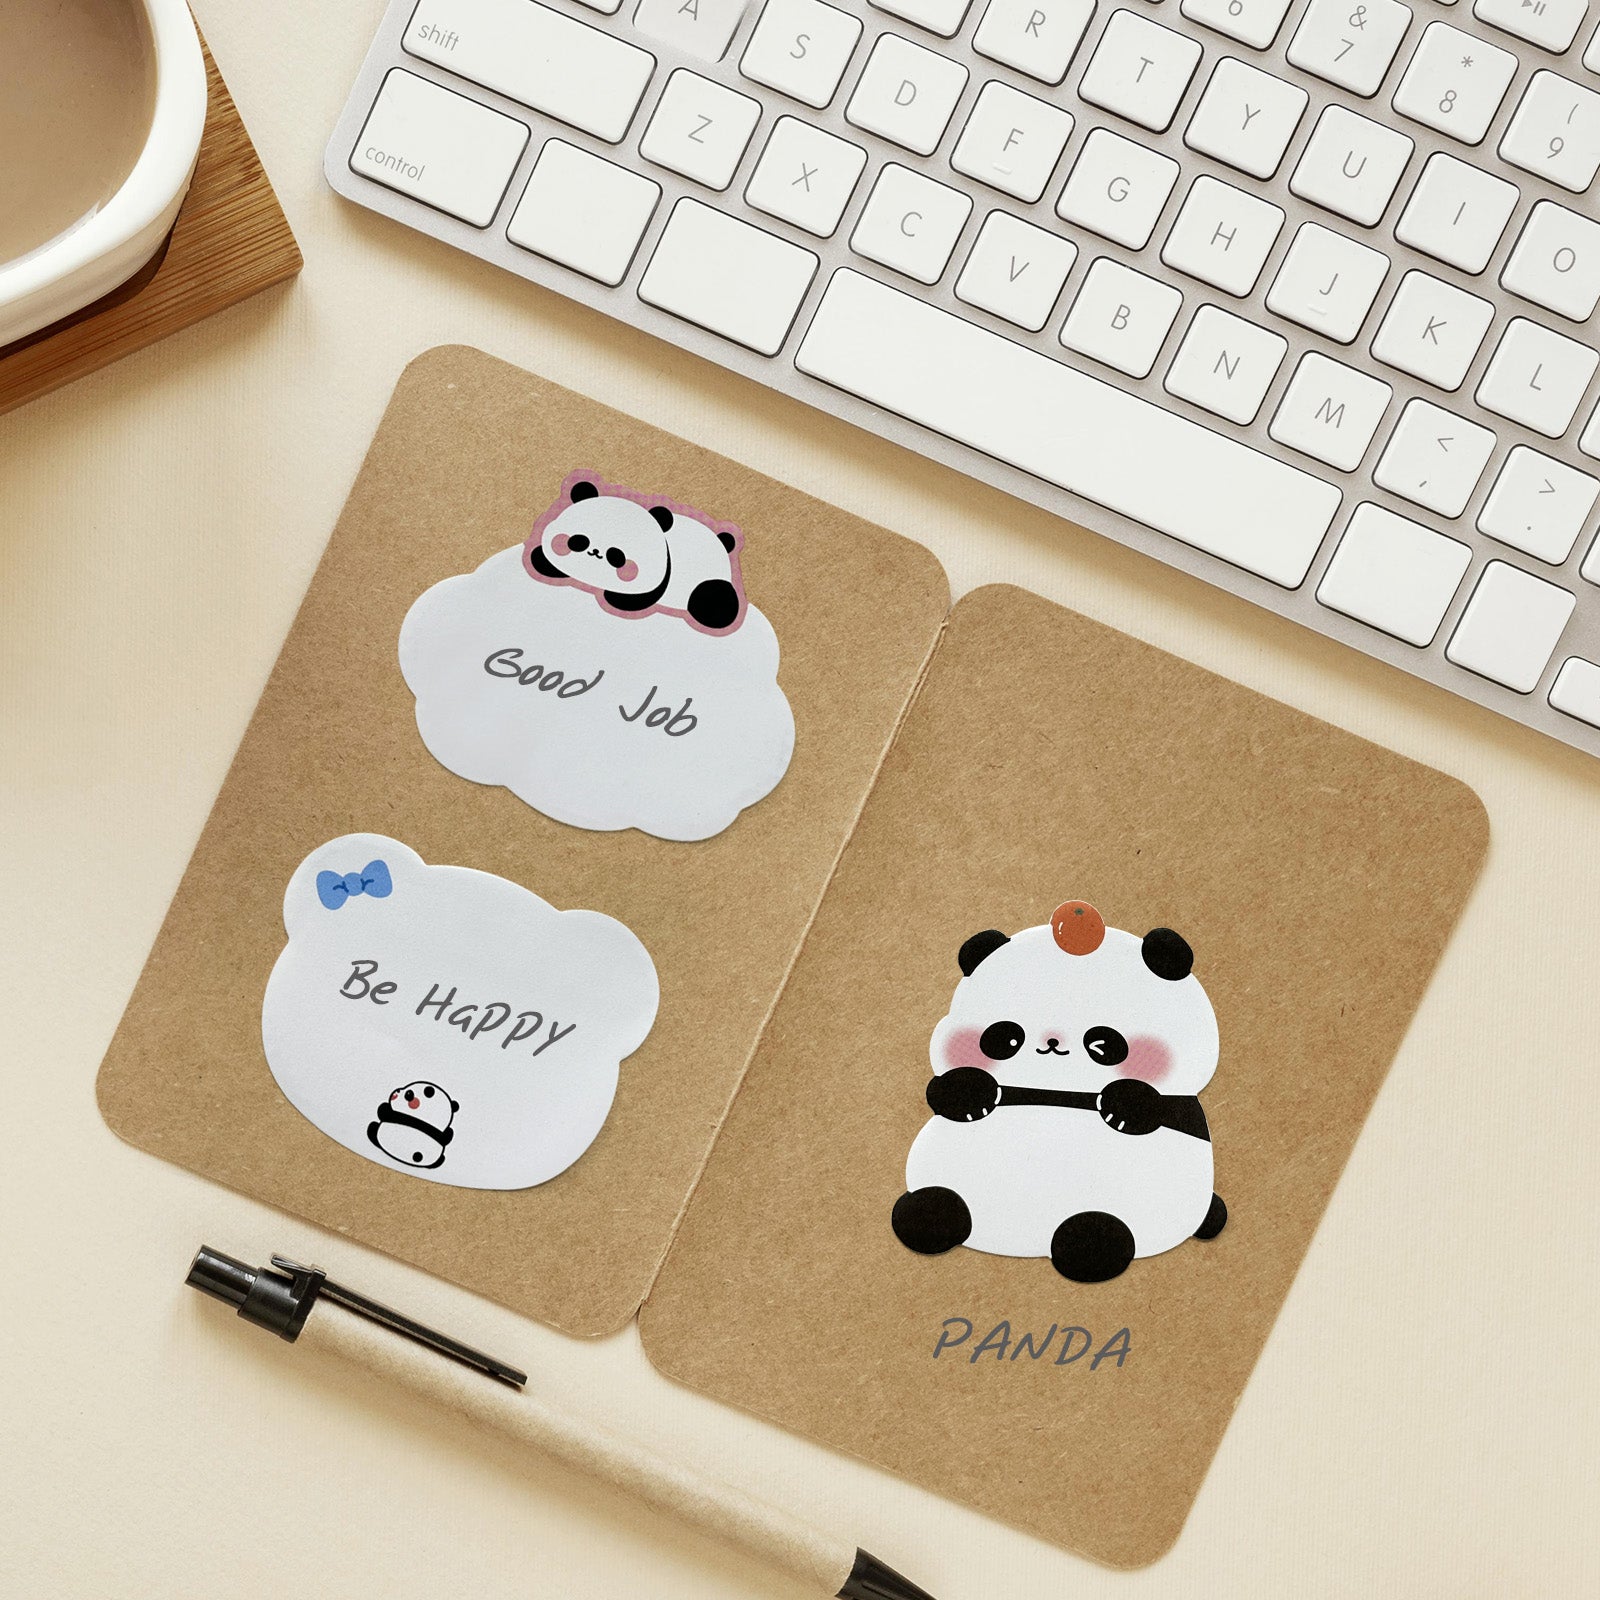 Wrapables Cute Panda Sticky Notes, Adhesive Memo Notepads for Home, Office, Work (Set of 8)